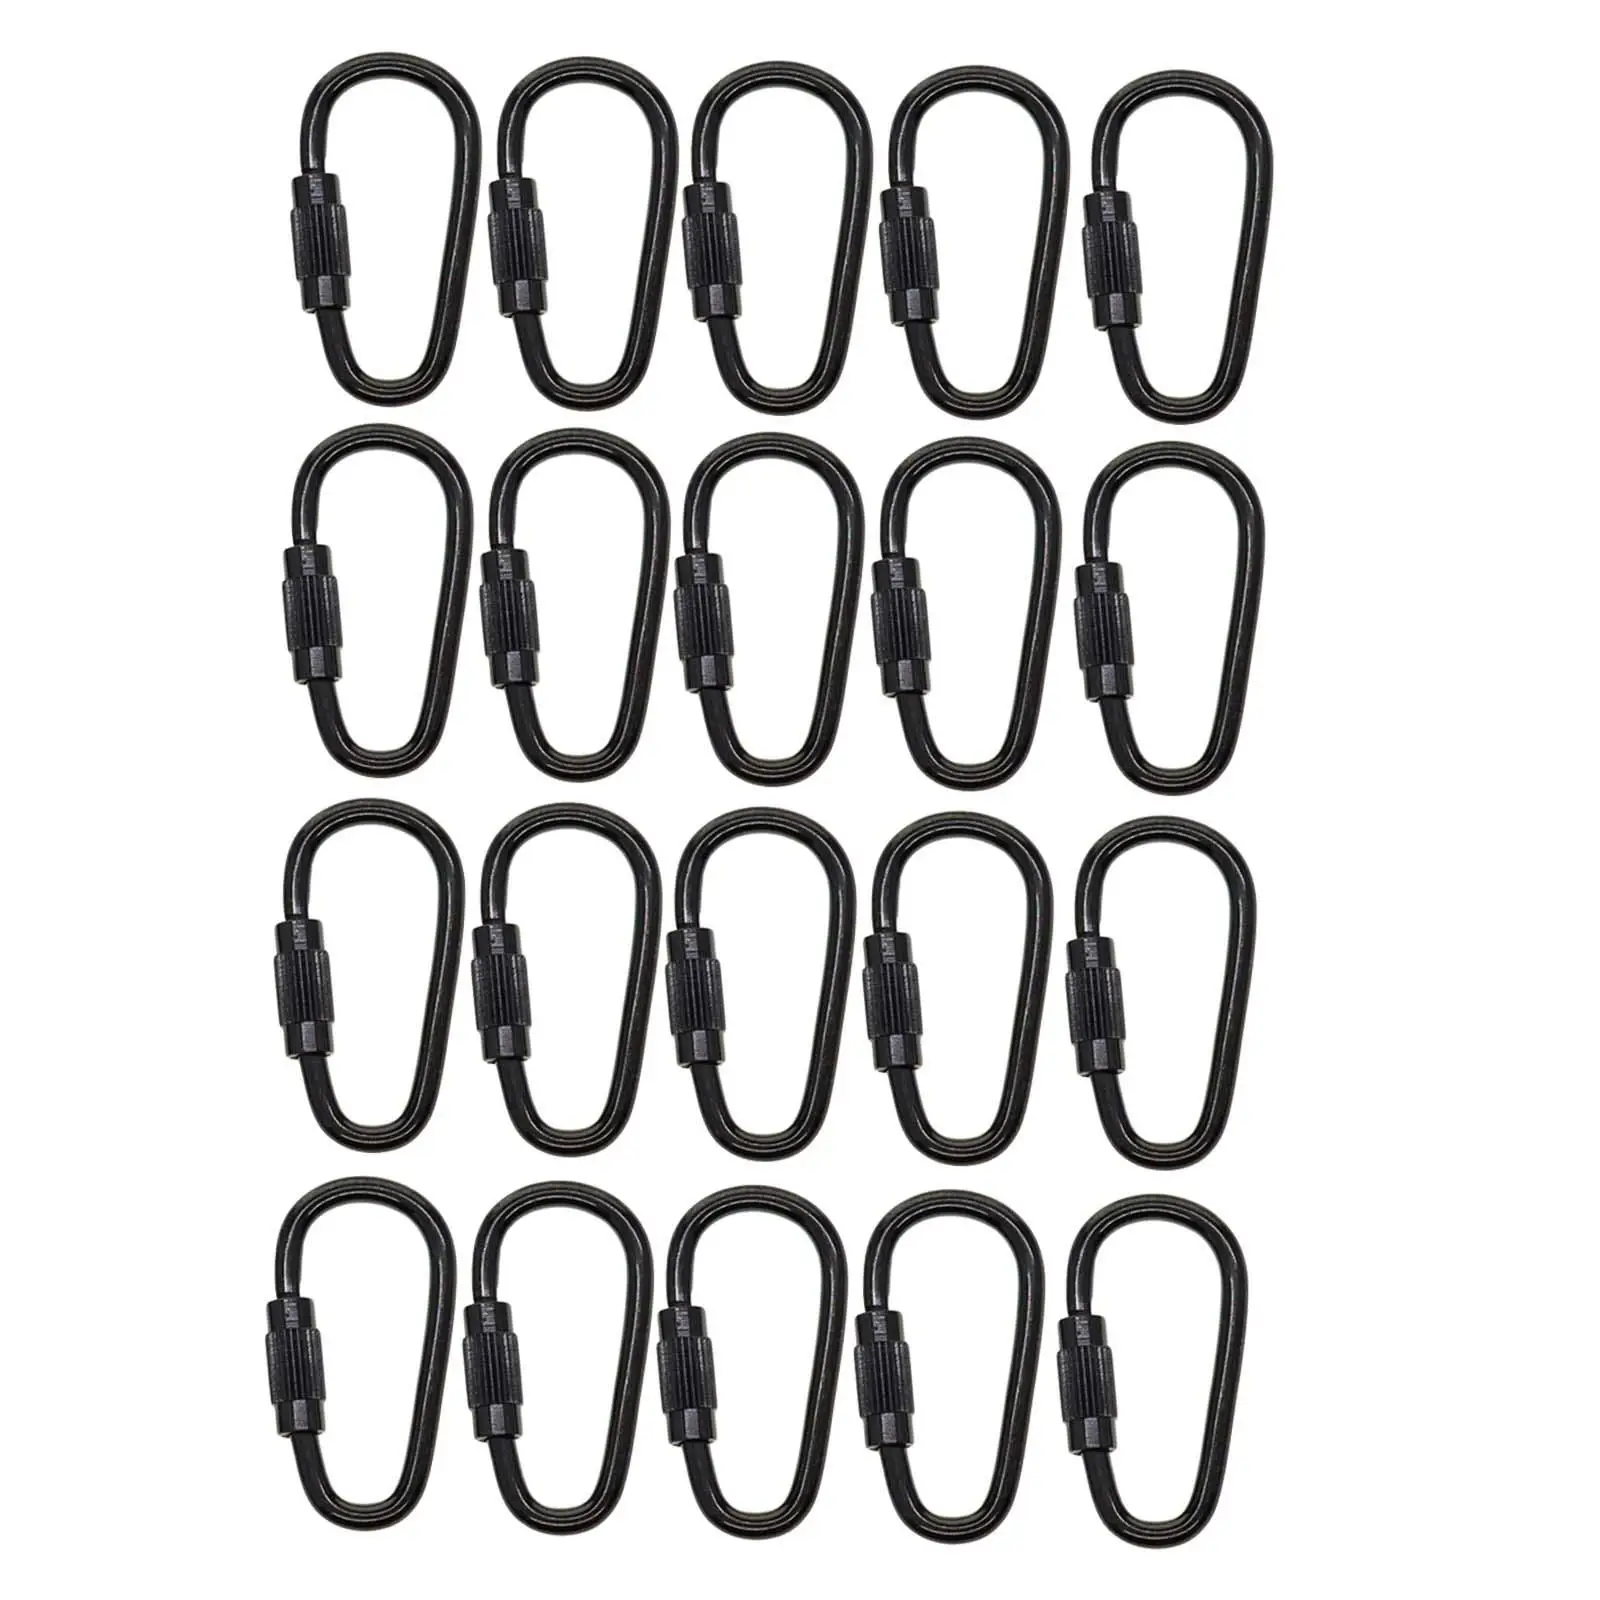 20Pcs Small Locking Carabiner Clip Black D Rings Mini Carabiner Clip for Camping Hiking Indoor Outdoor Use Backpacking Traveling